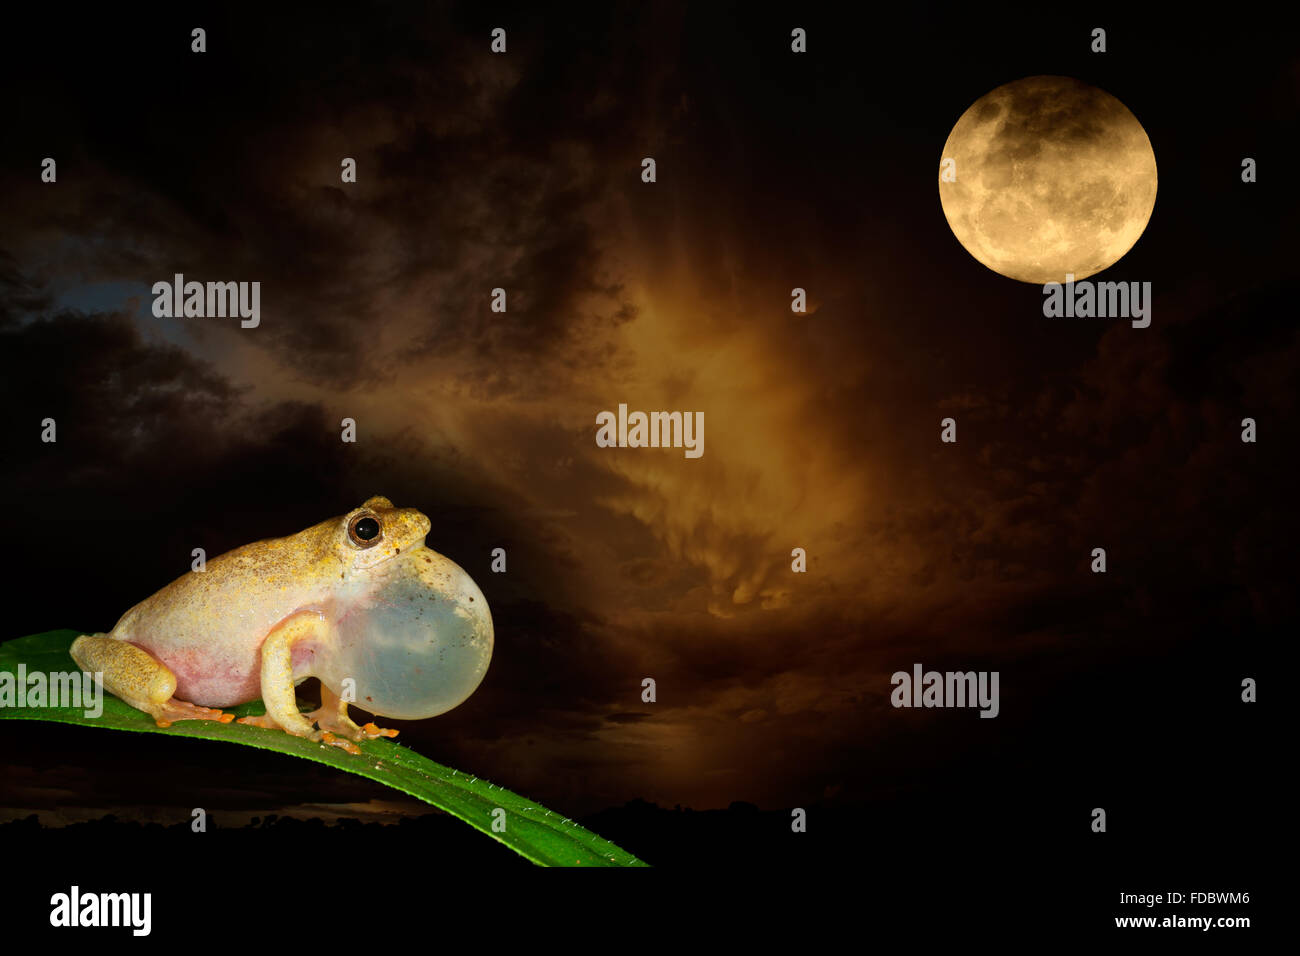 African painted reed frog (Hyperolius marmoratus) calling during a moonlit night Stock Photo